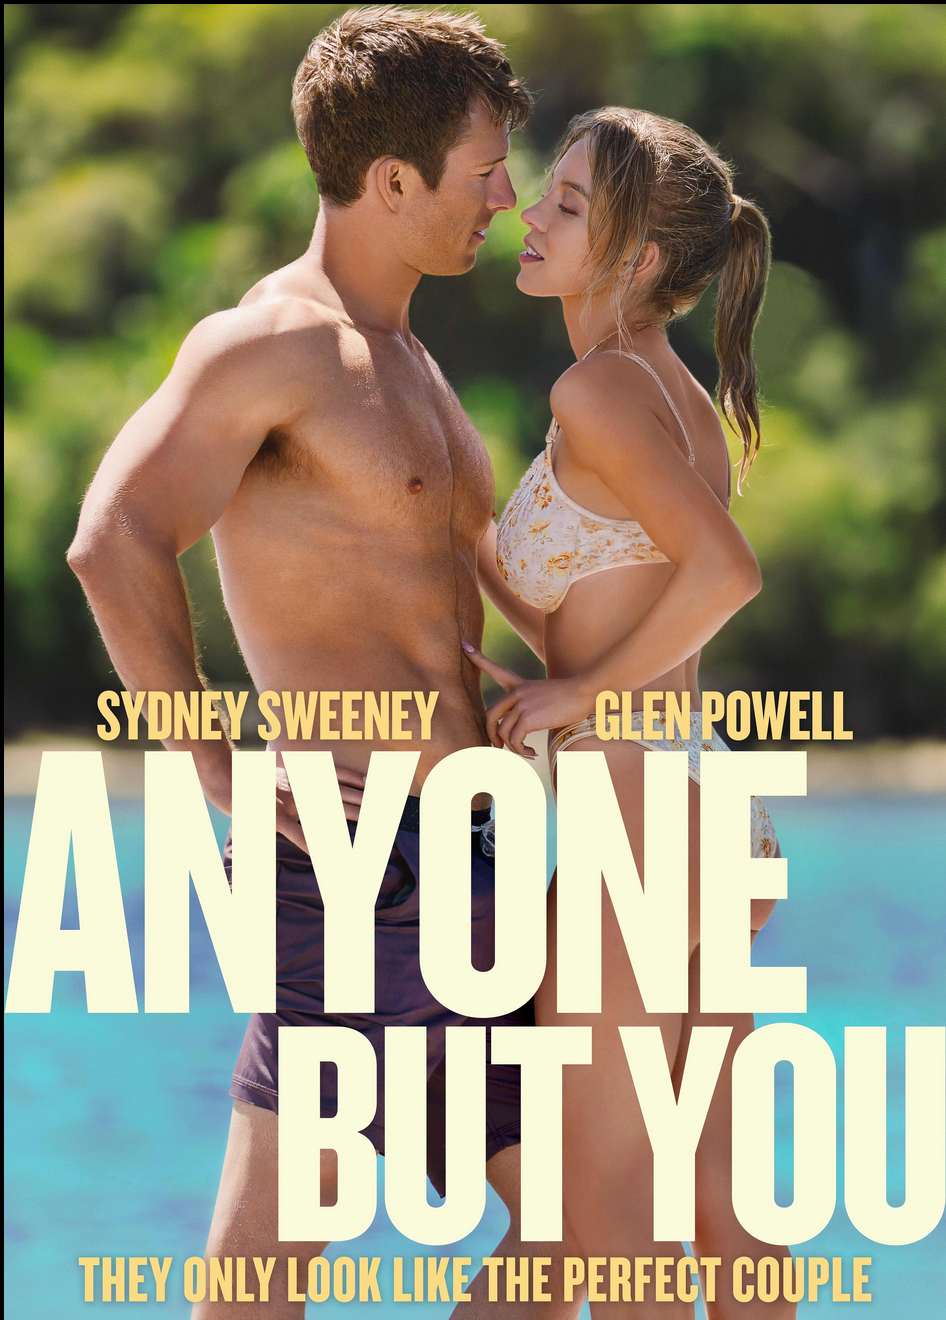 Promo poster with Ben and Bea in bathing suits standing facing each other looking like they are about to kiss. the title and the actors names are below with the tagline "They only look like the perfectly couple."